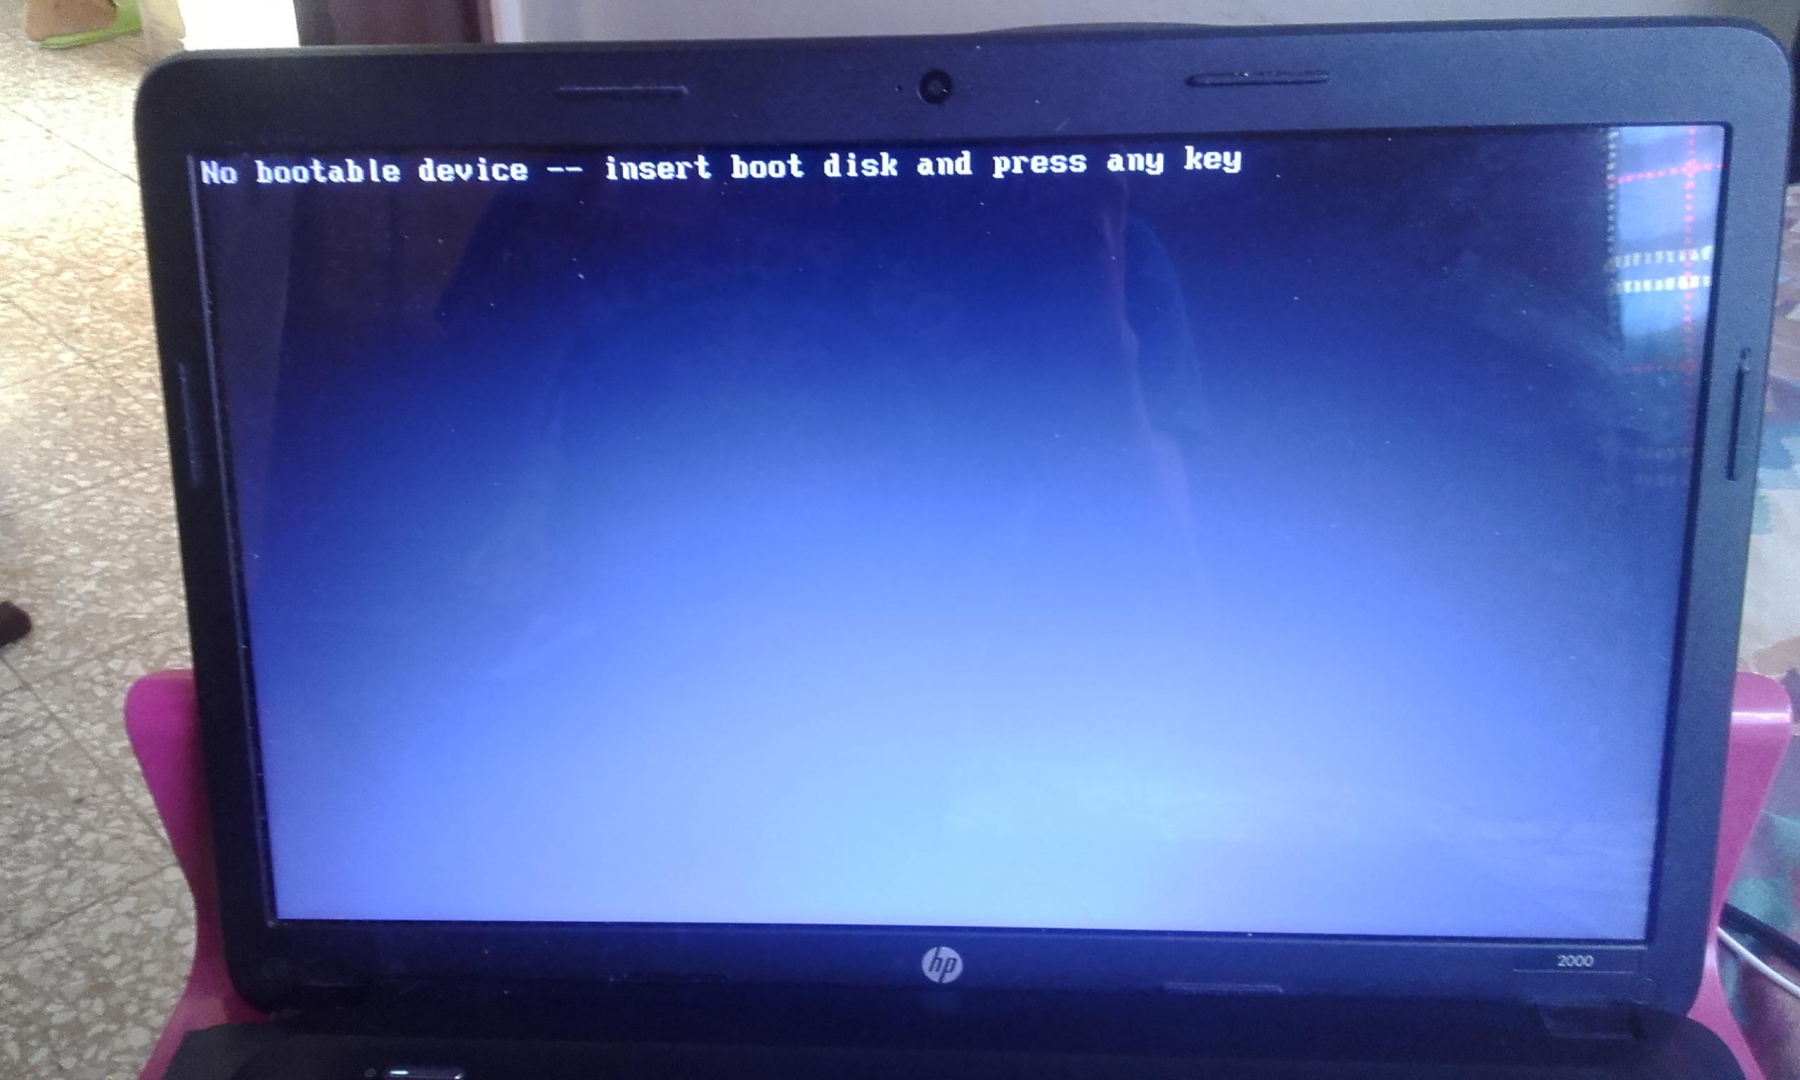 No booting device ноутбук. Boot device ноутбук. Ноутбук Acer Boot device. No Bootable device Insert Boot Disk and Press any Key.